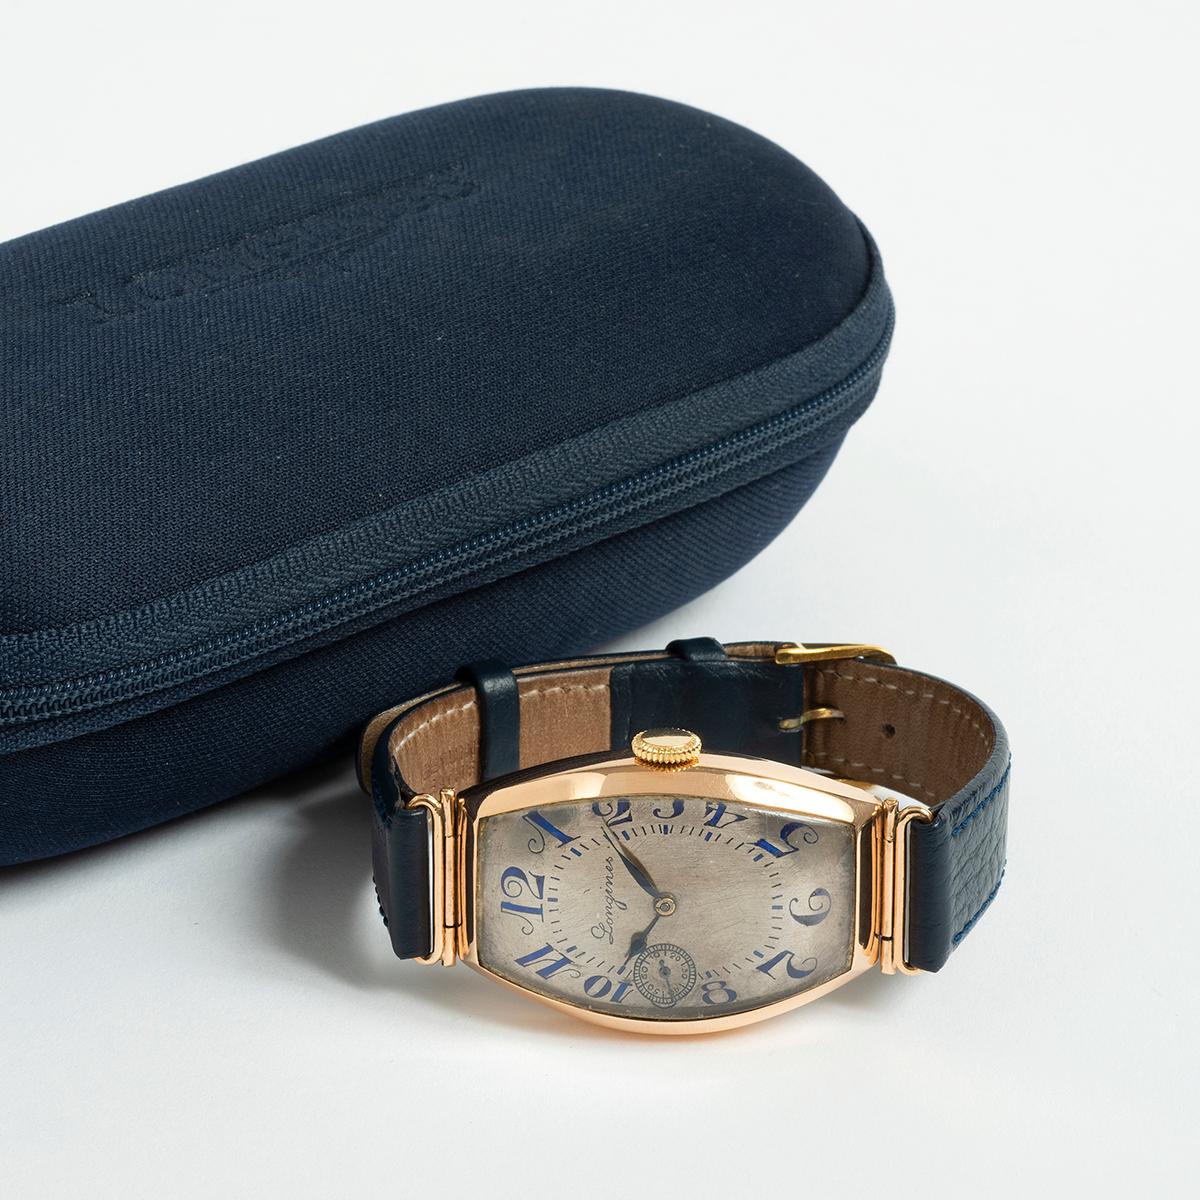 Our extremely rare Longines manually wound 14k yellow gold dress watch with integral lugs and tonneau case features an unusual dial in silver with sub seconds and art deco cursive hand applied numerals dial in blue. This vintage Longines is